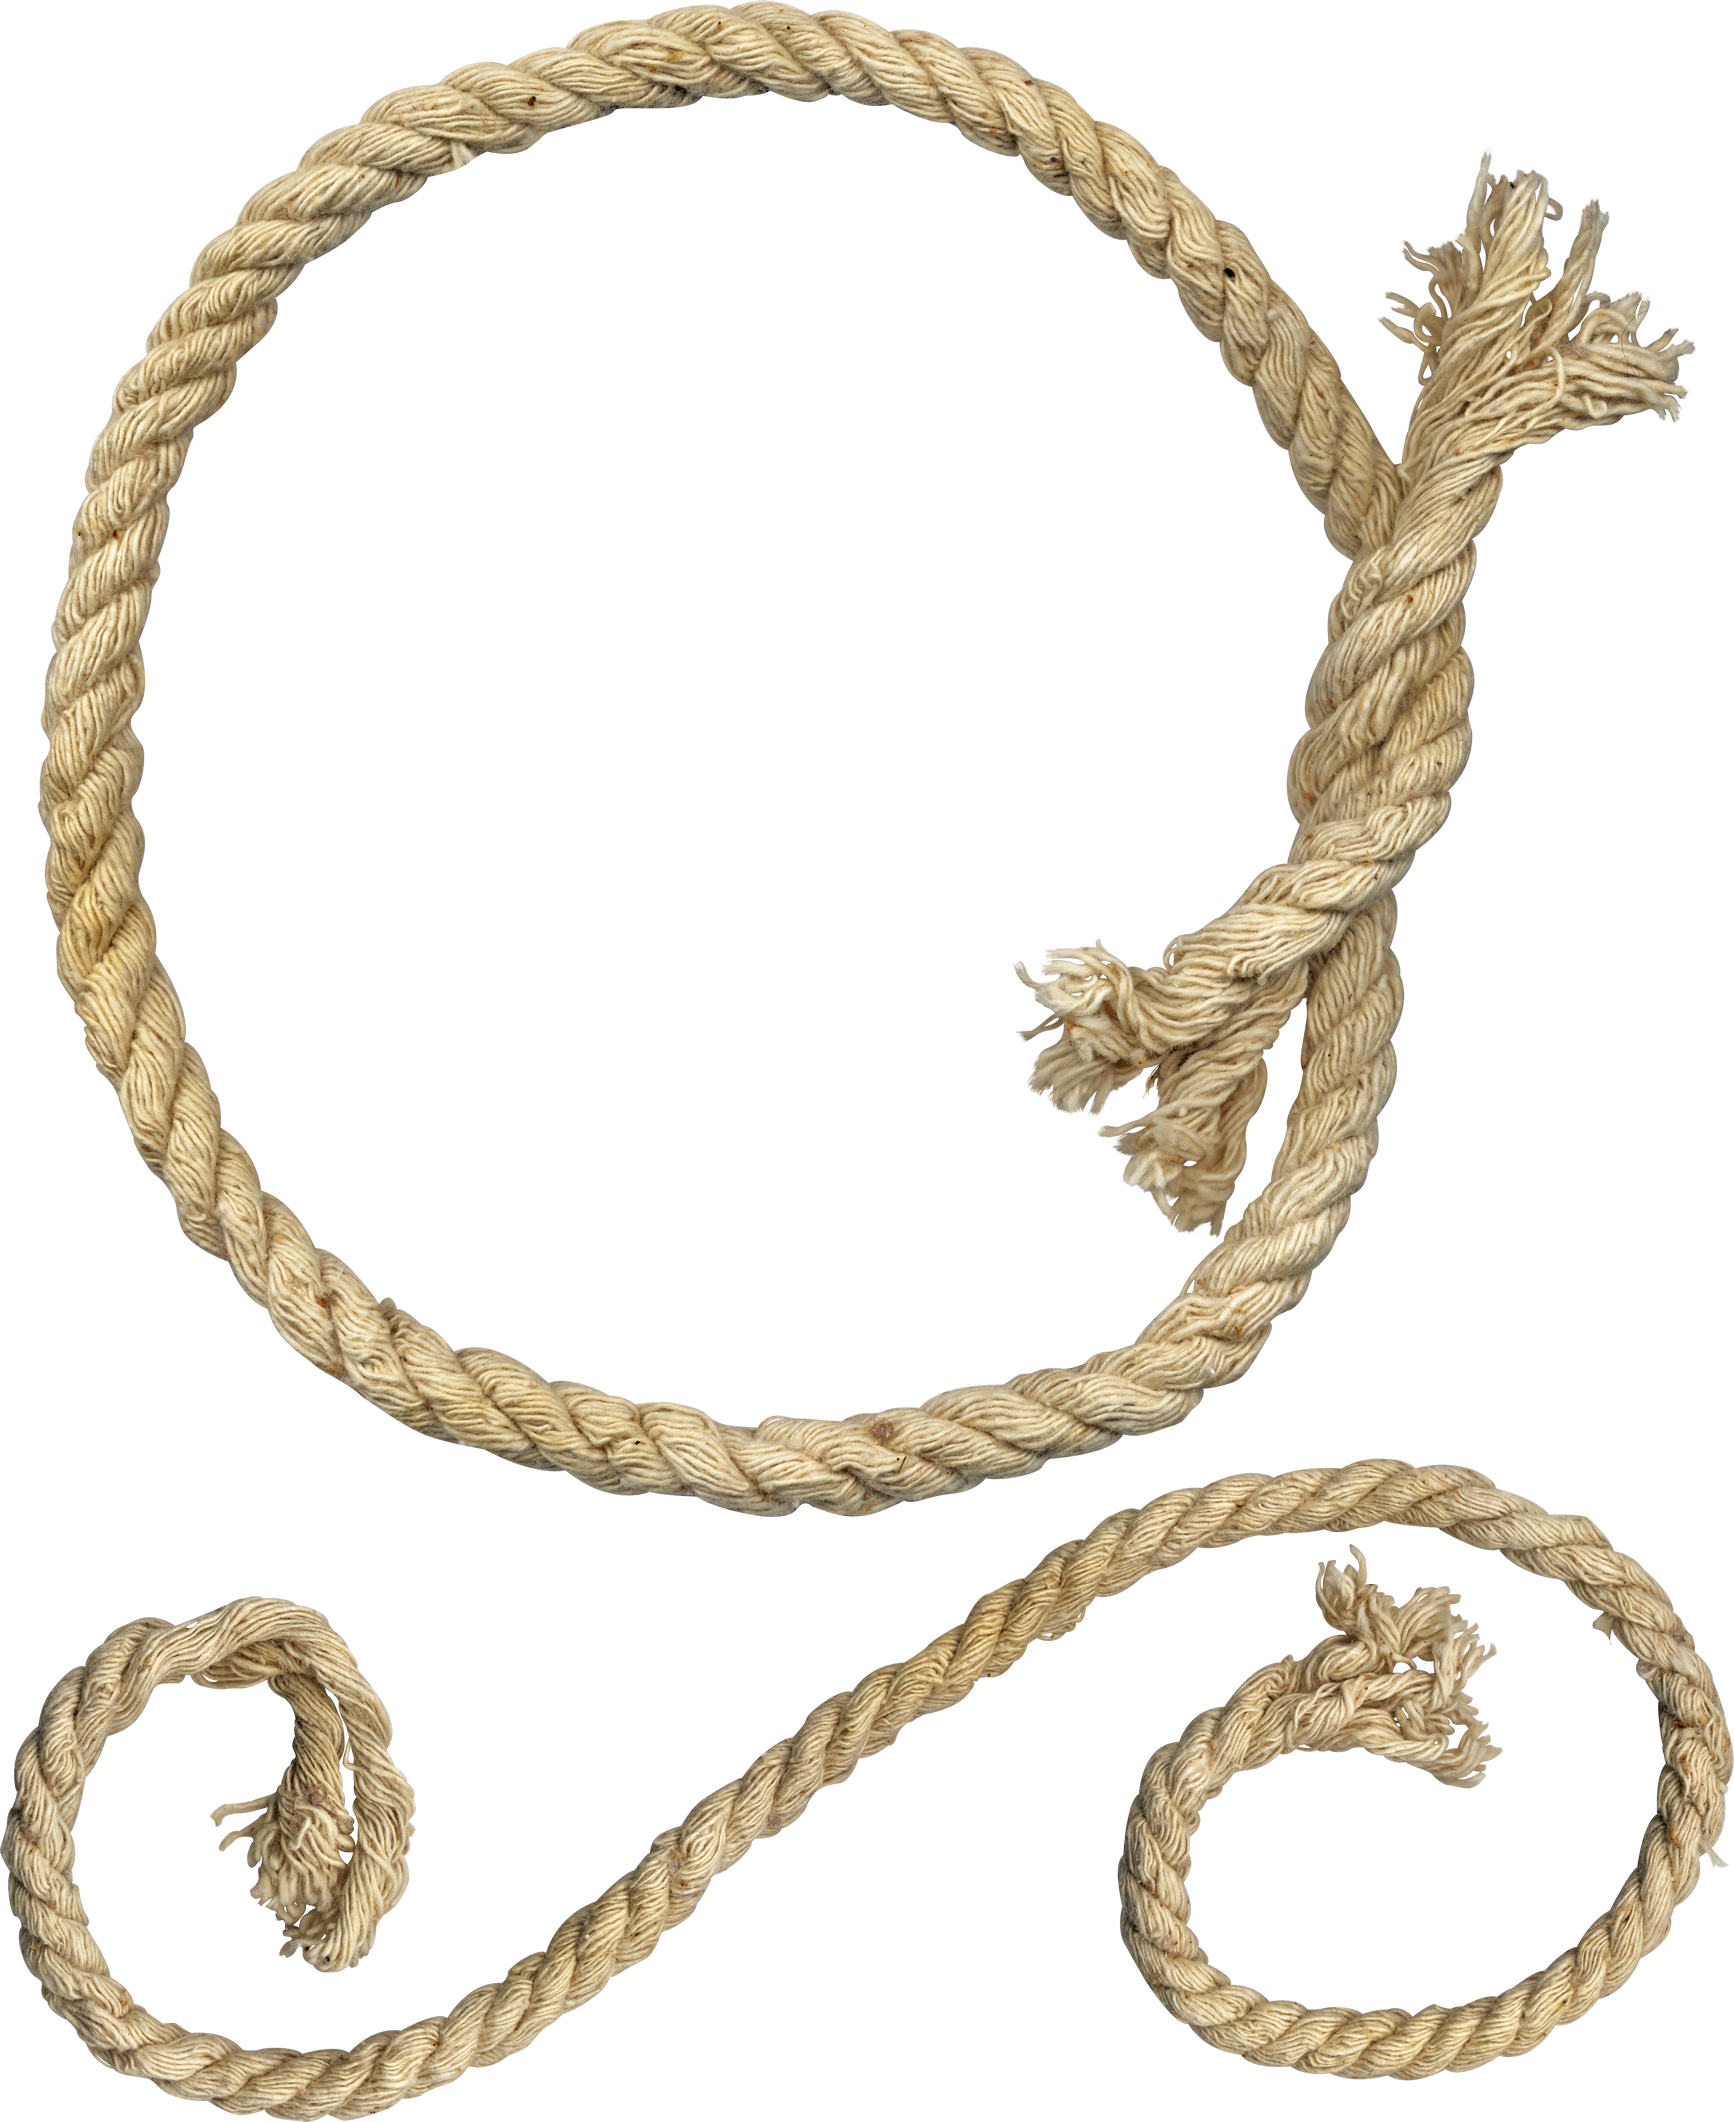 Rope No Background Clip Art